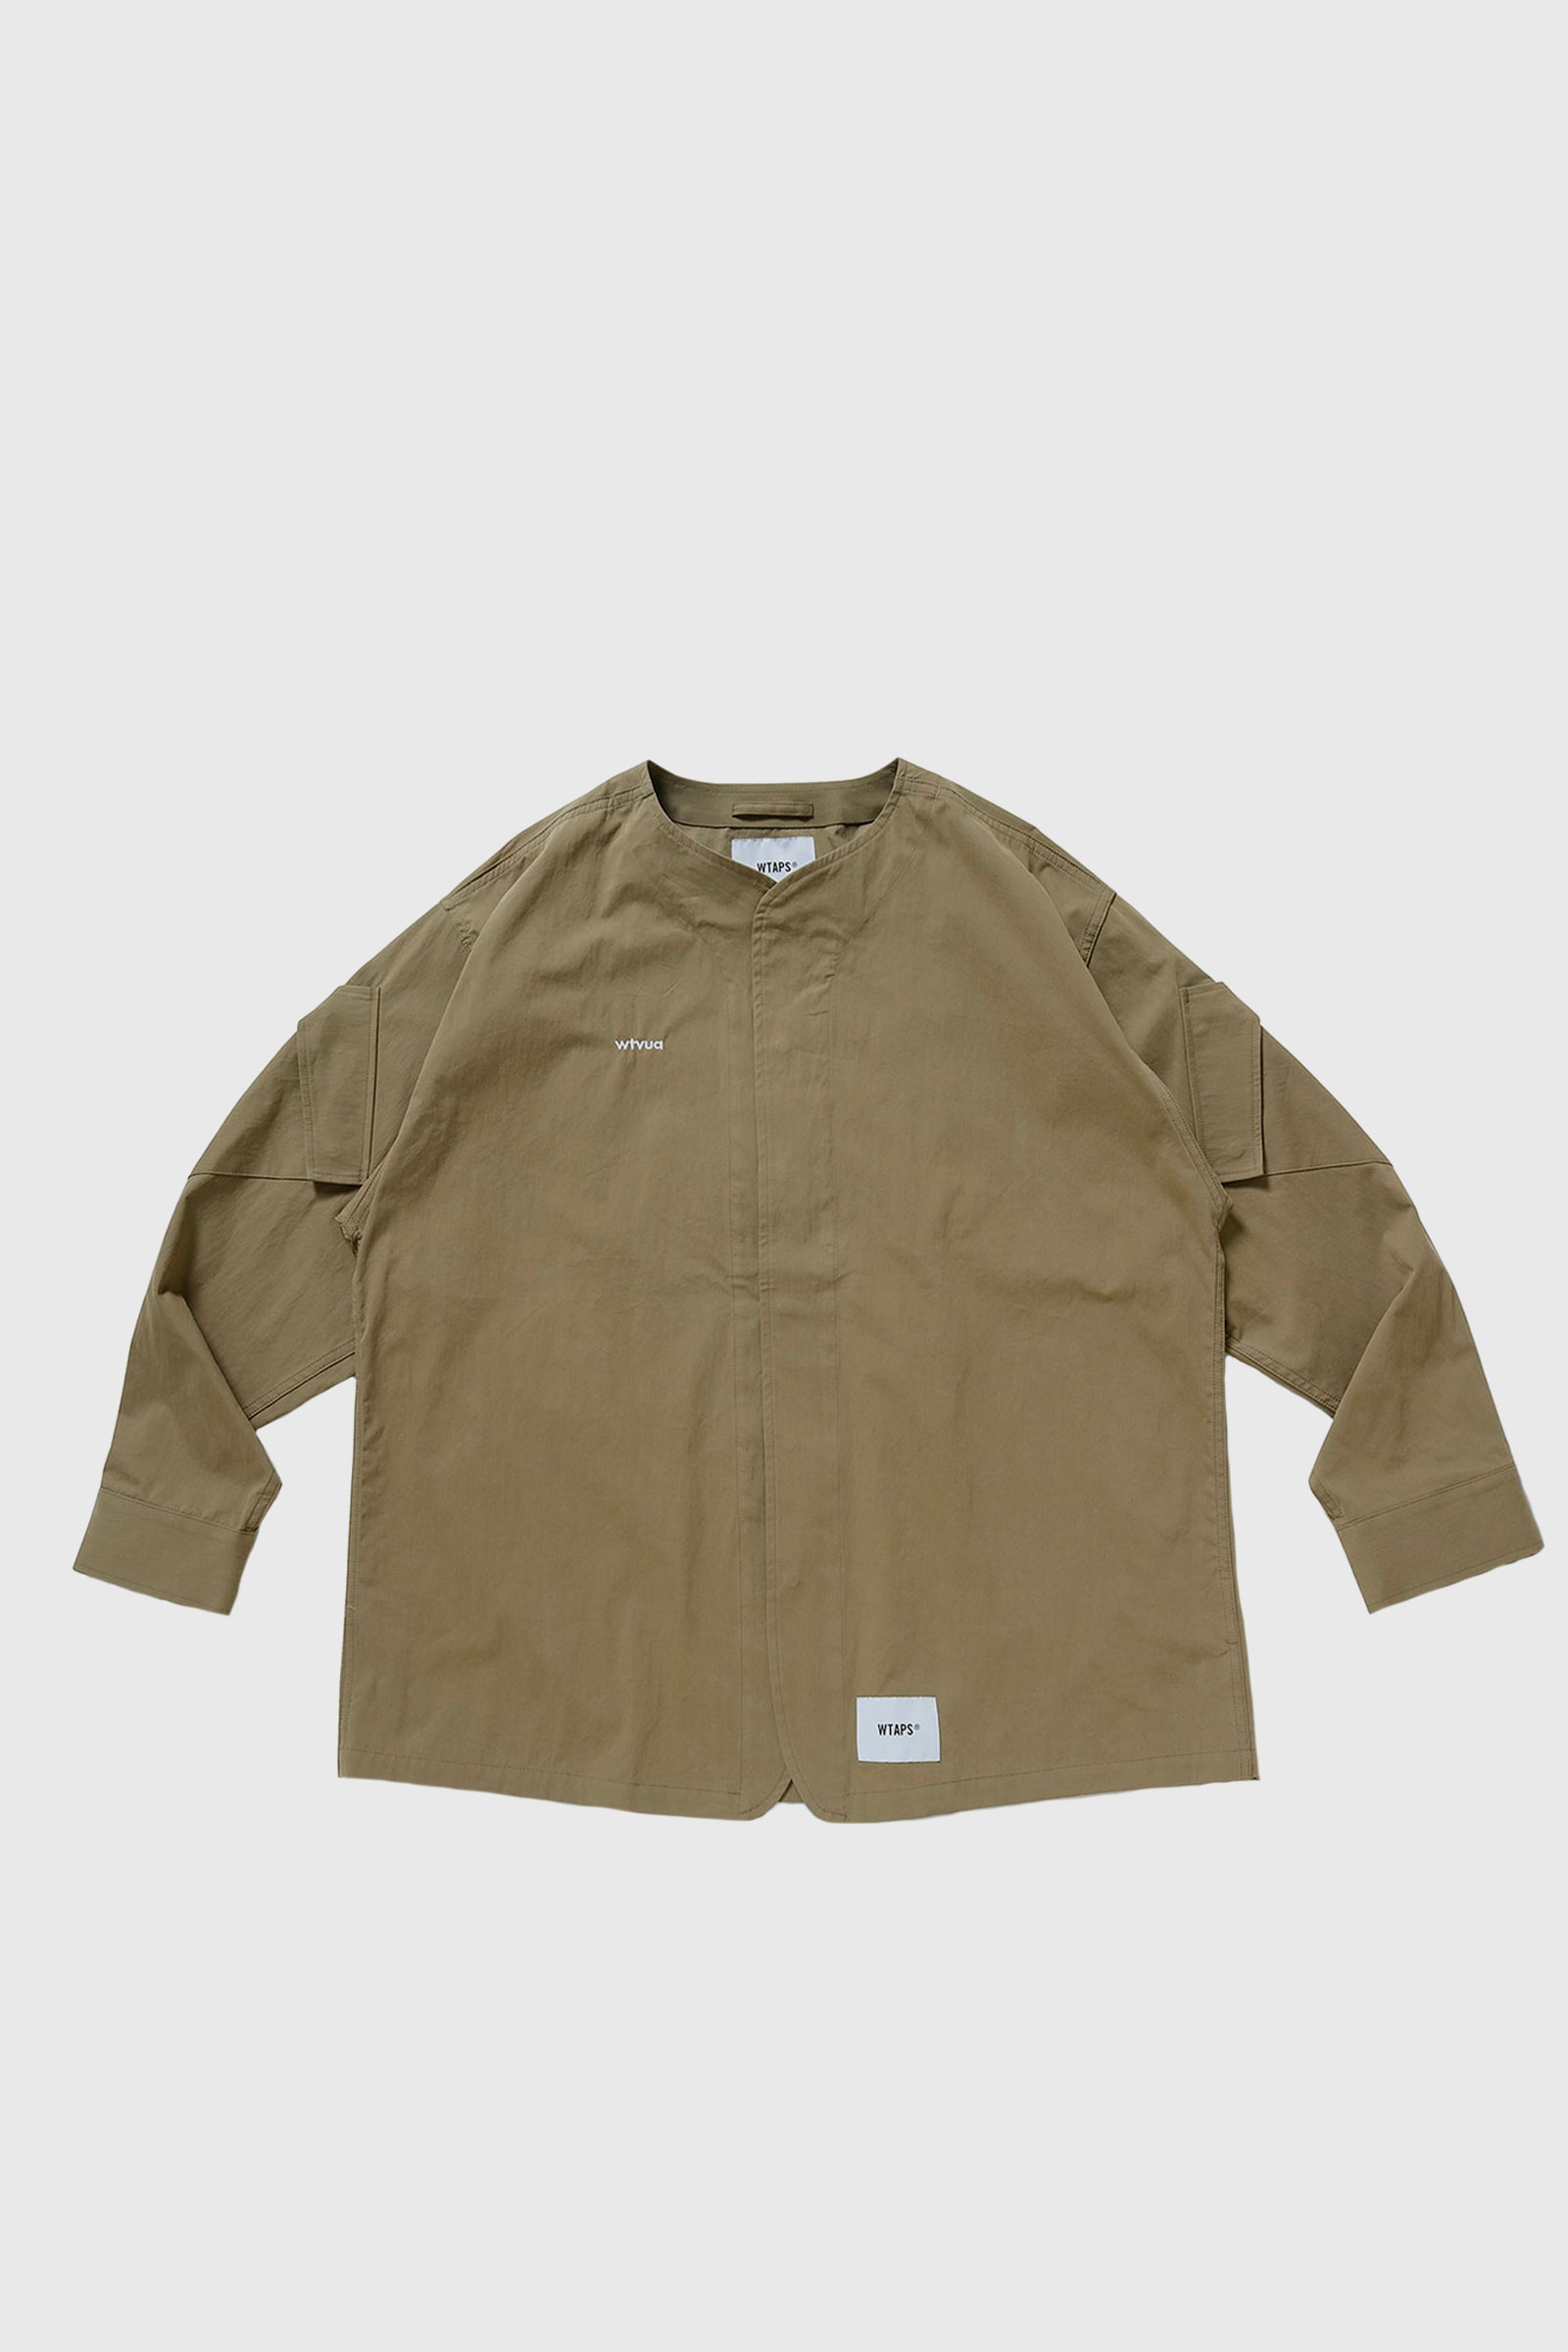 Wtaps SCOUT / LS / NYCO. TUSSAH Beige-